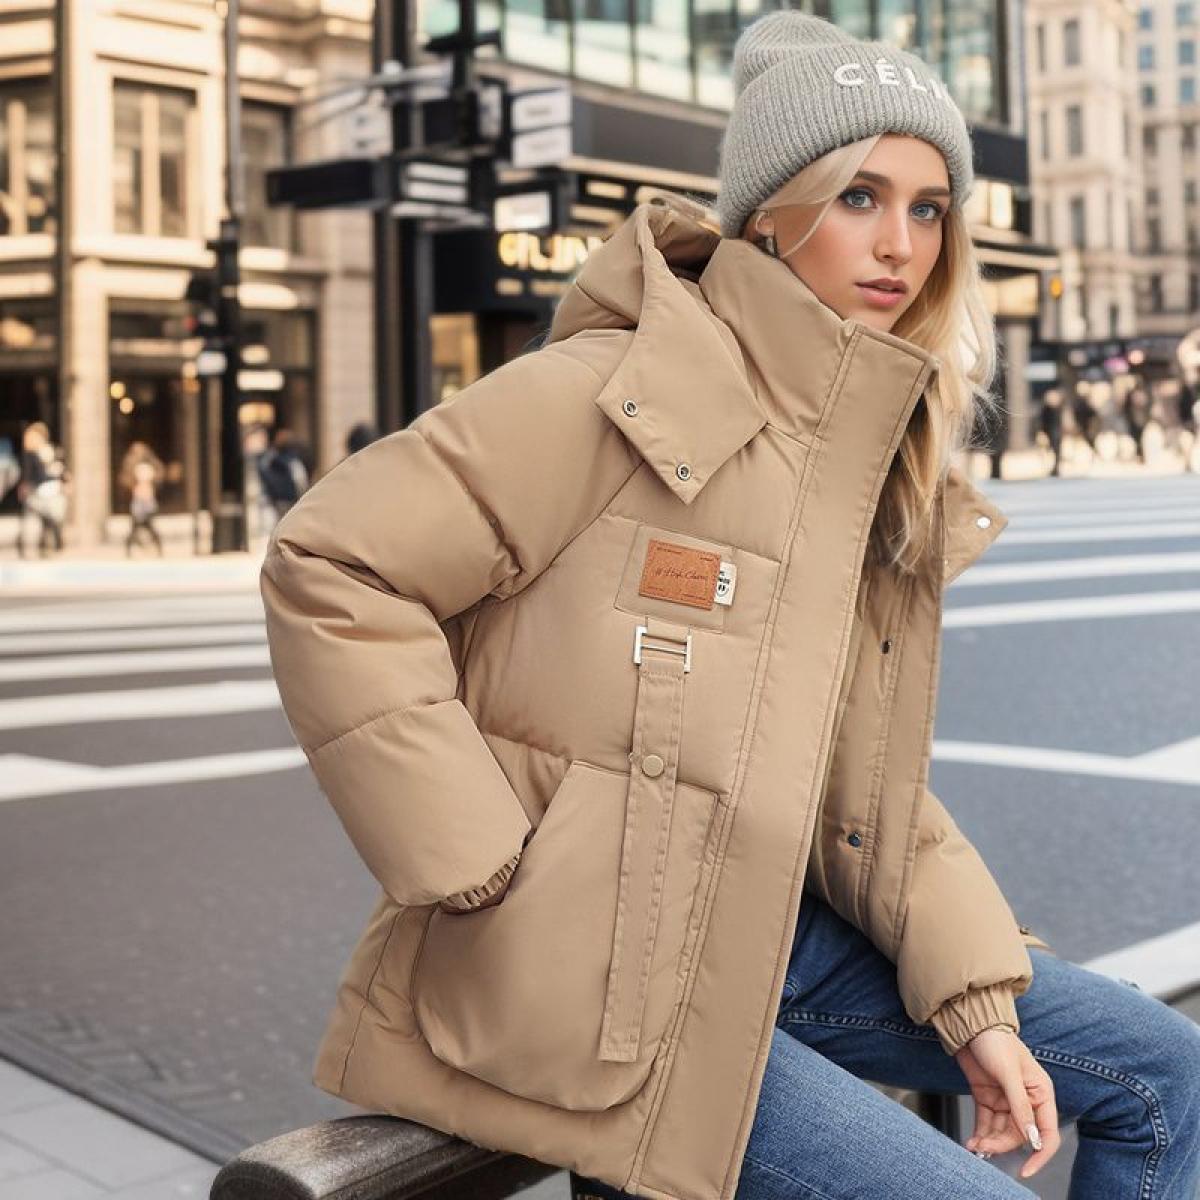 2023 New Winter Jacket Coats Women Parkas Female Down Cotton Jackets Hooded Overcoat Thick Warm Windproof Casual Student